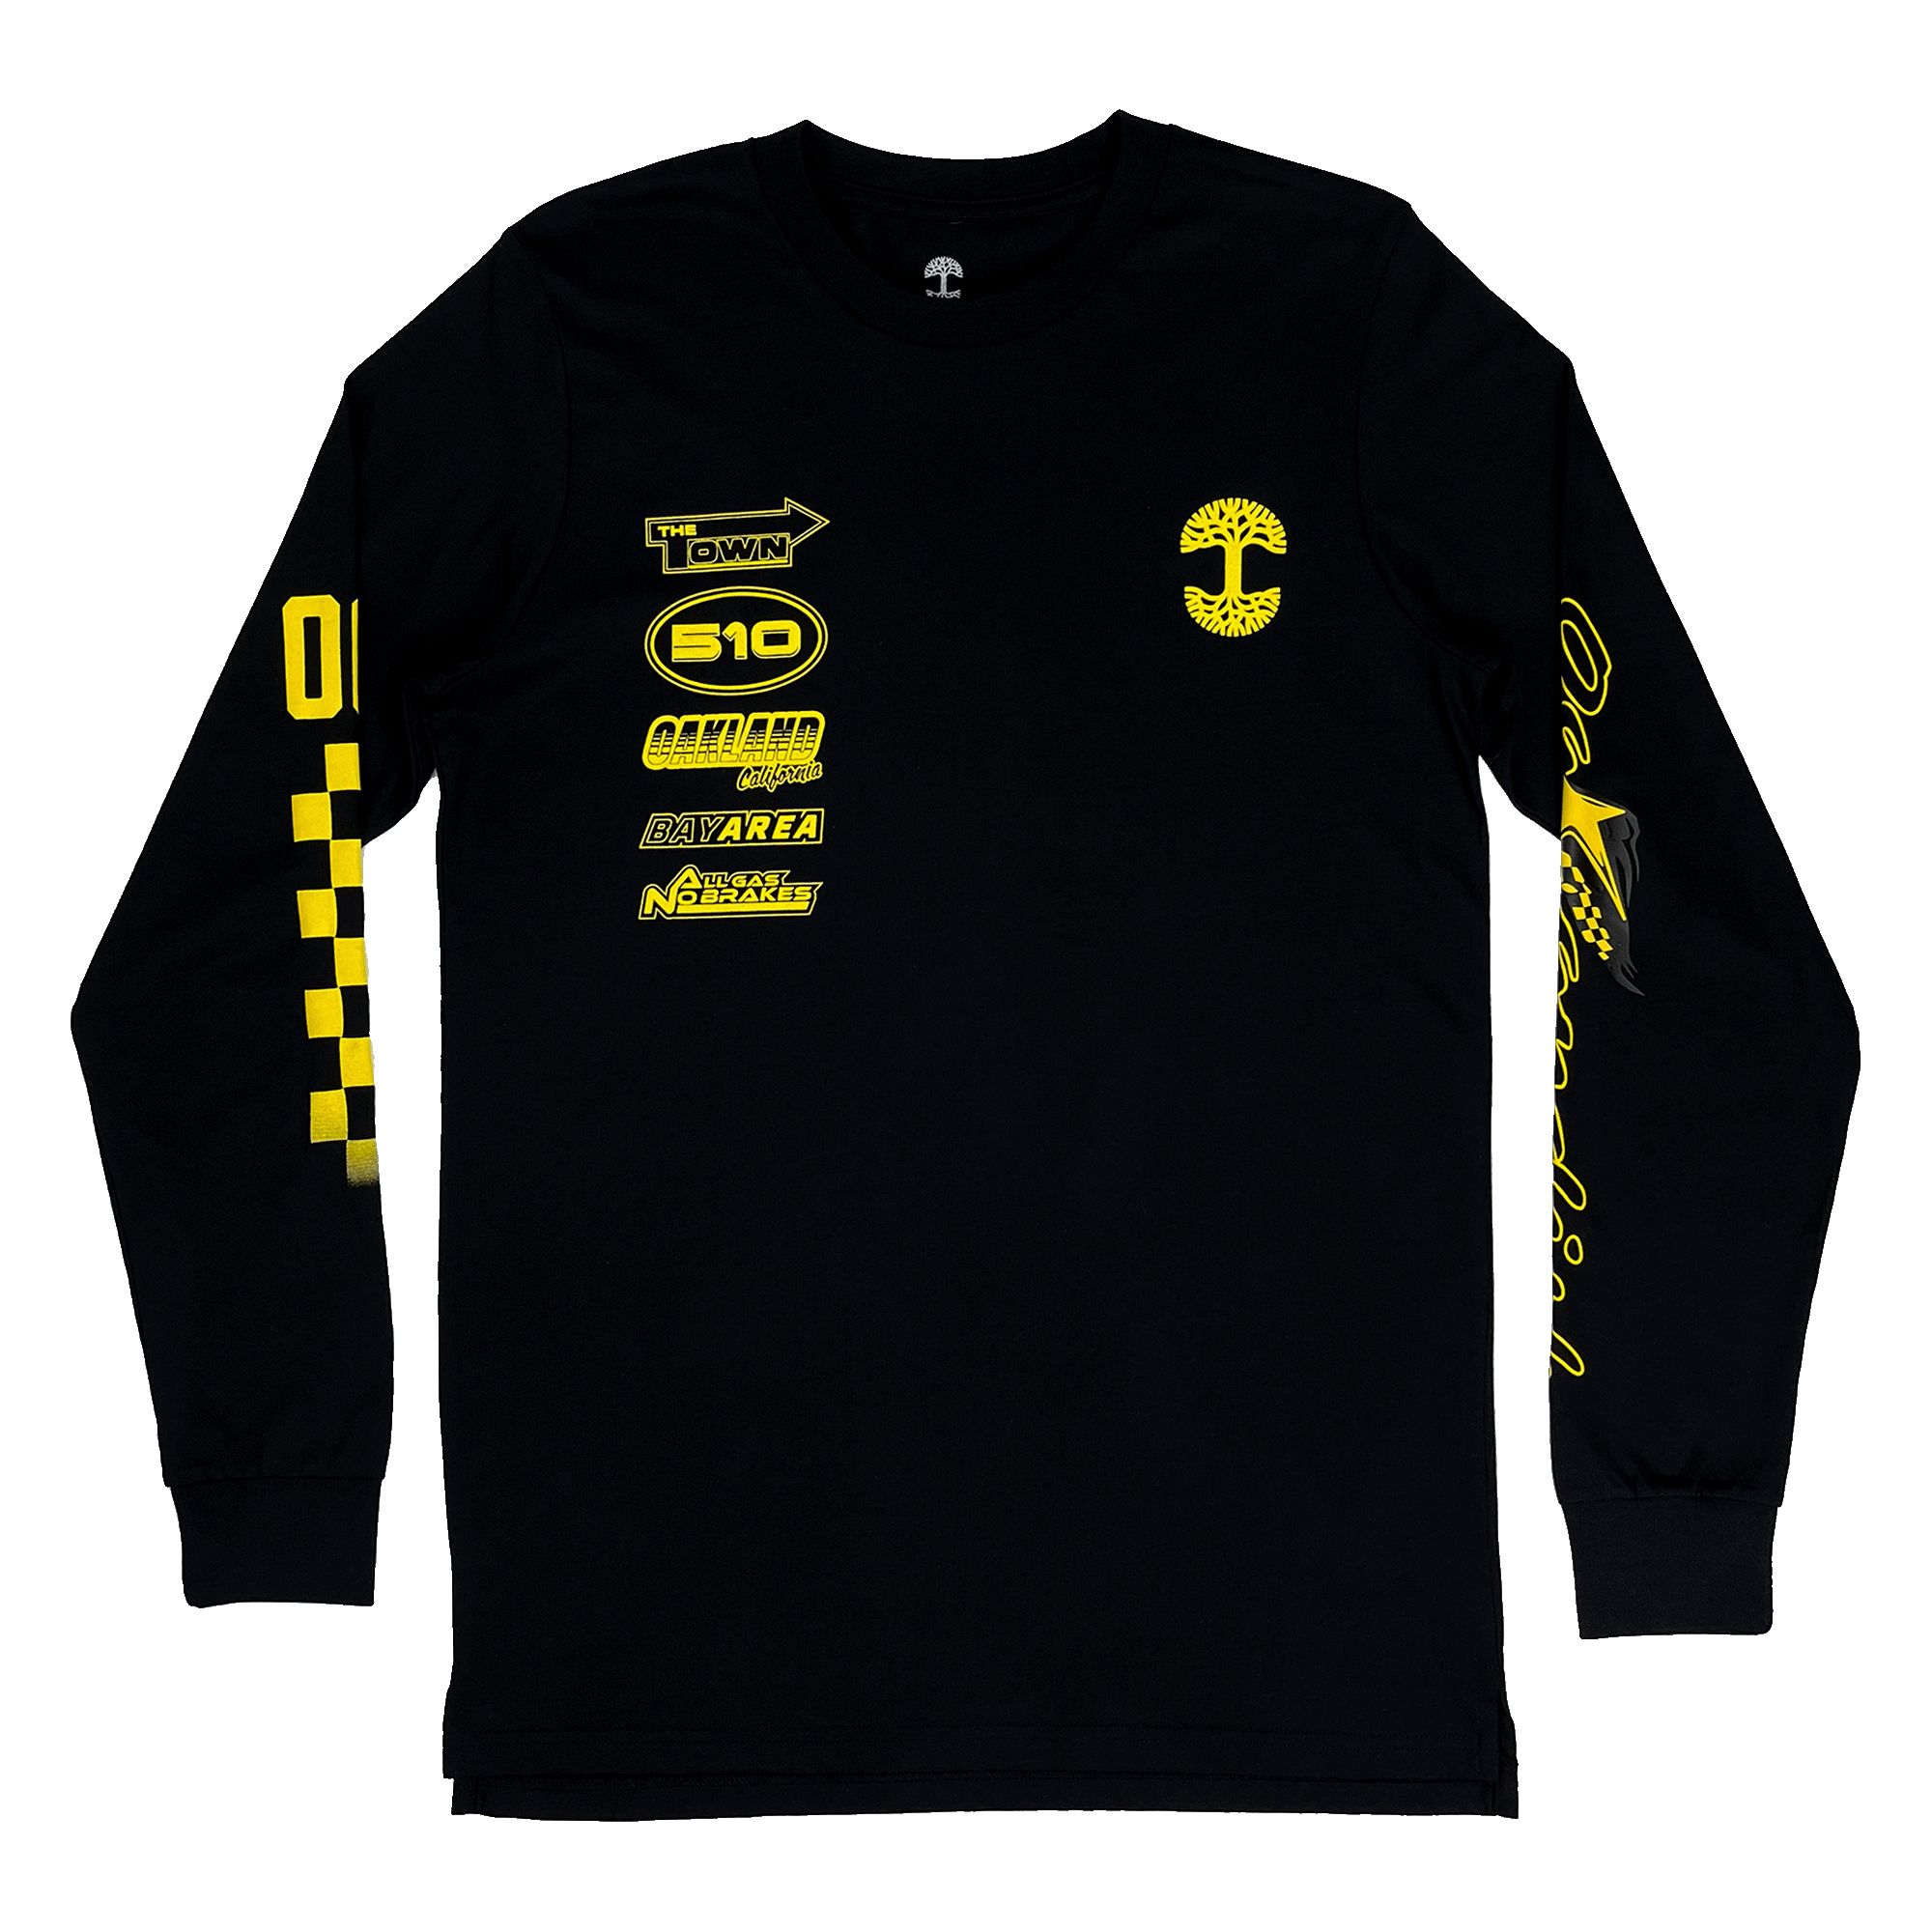 Black long sleeve t-shirt with yellow race car-inspired design on the front and on the sleeves.